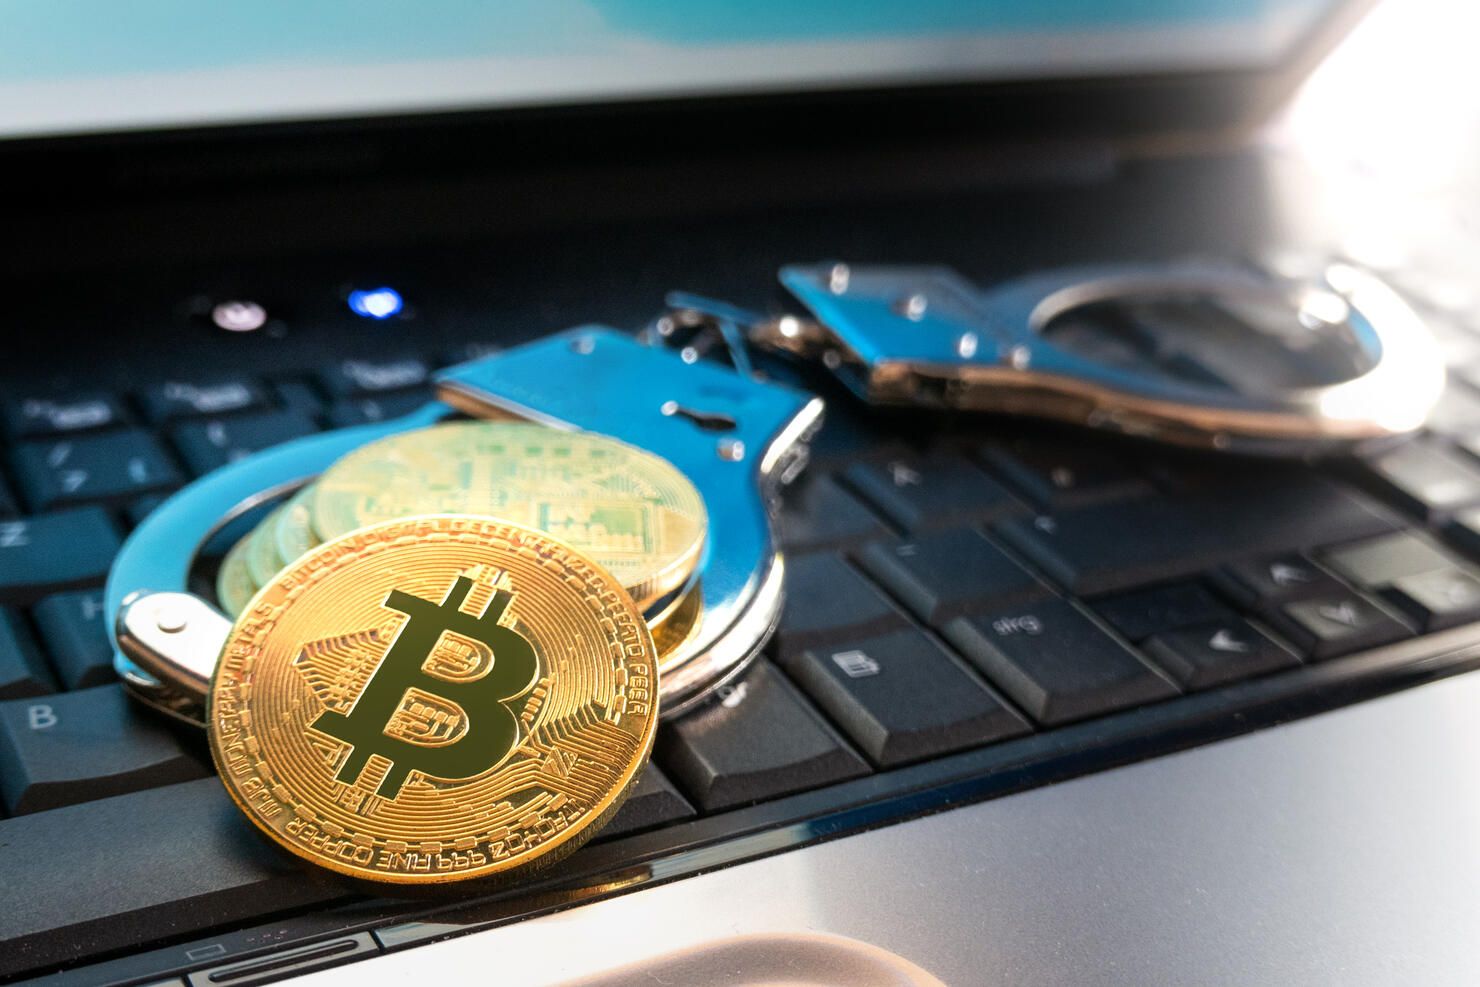 Bitcoin coins and handcuffs lie on the keyboard of the laptop.